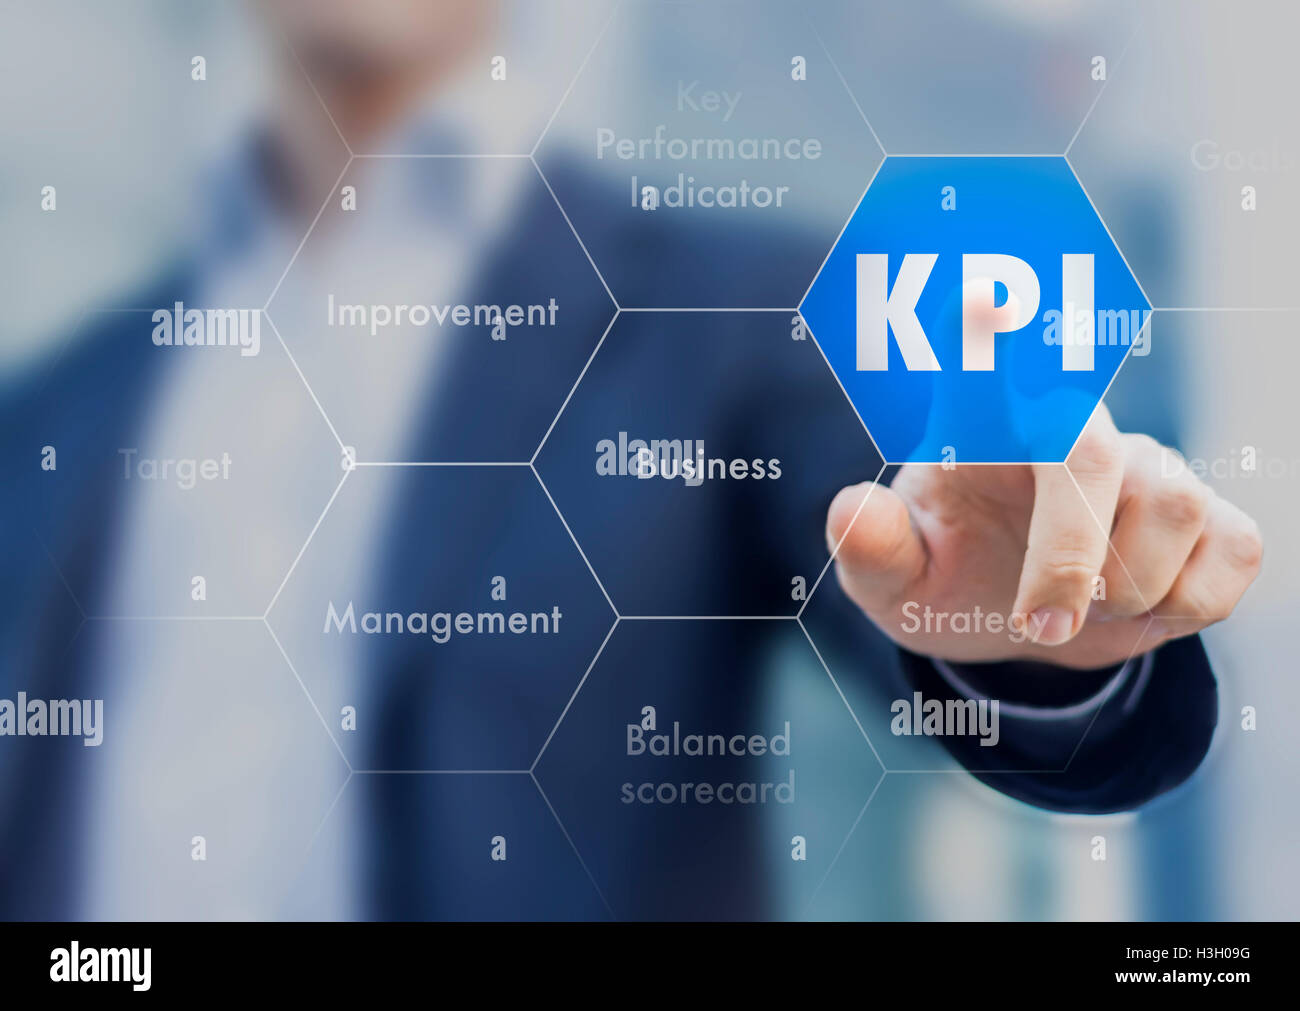 KPI business management with key performance indicator presented by businessman Stock Photo